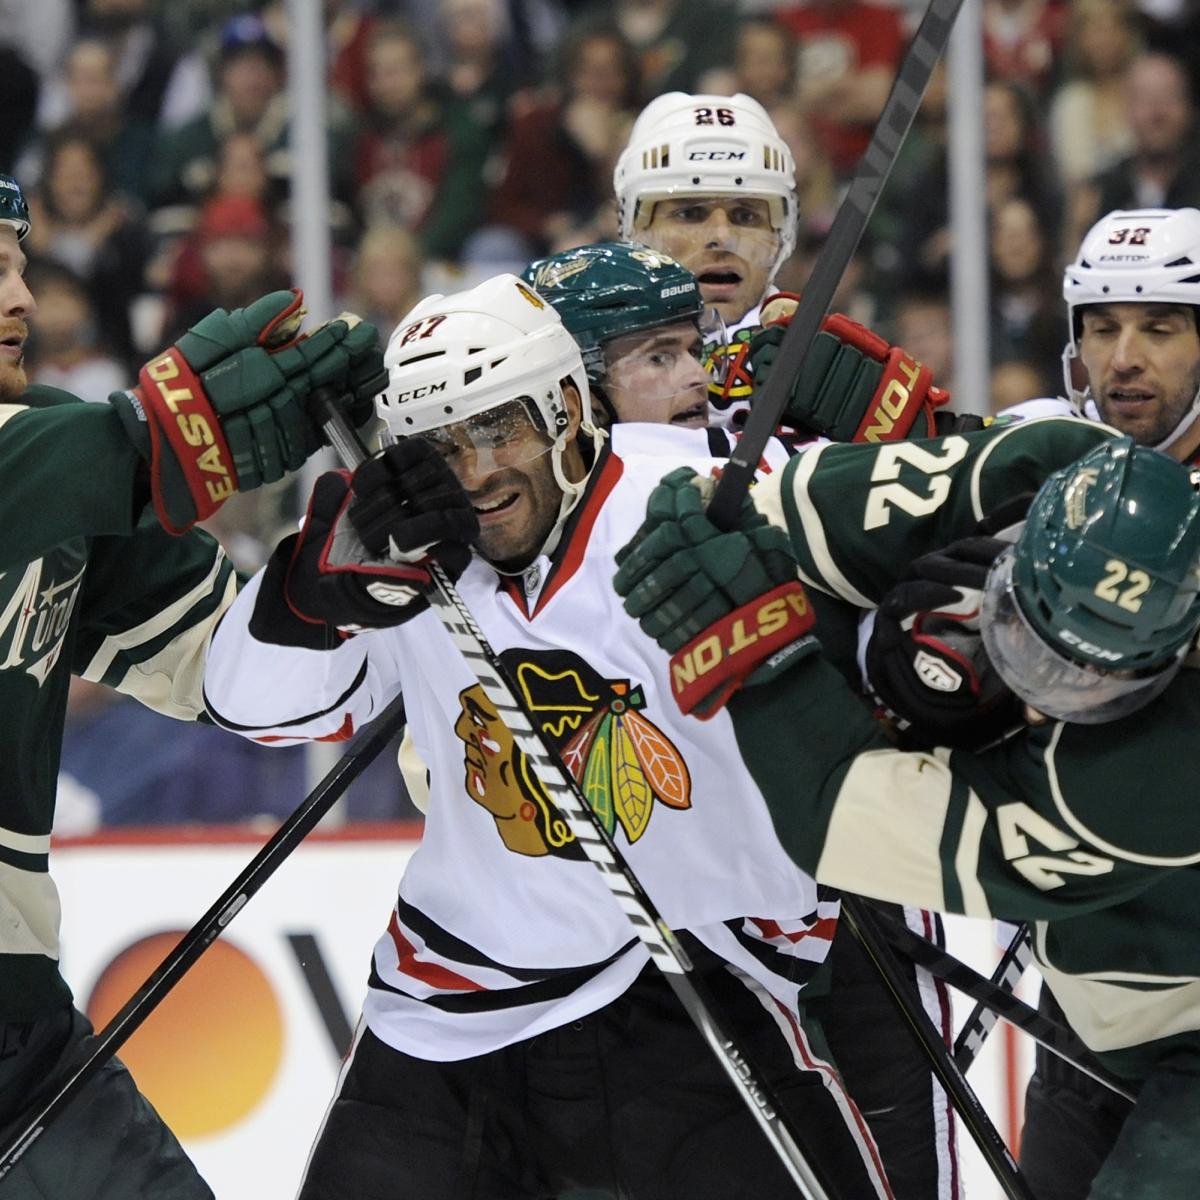 Minnesota Wild 201314 NHL Schedule MustSee Games, Predictions & More